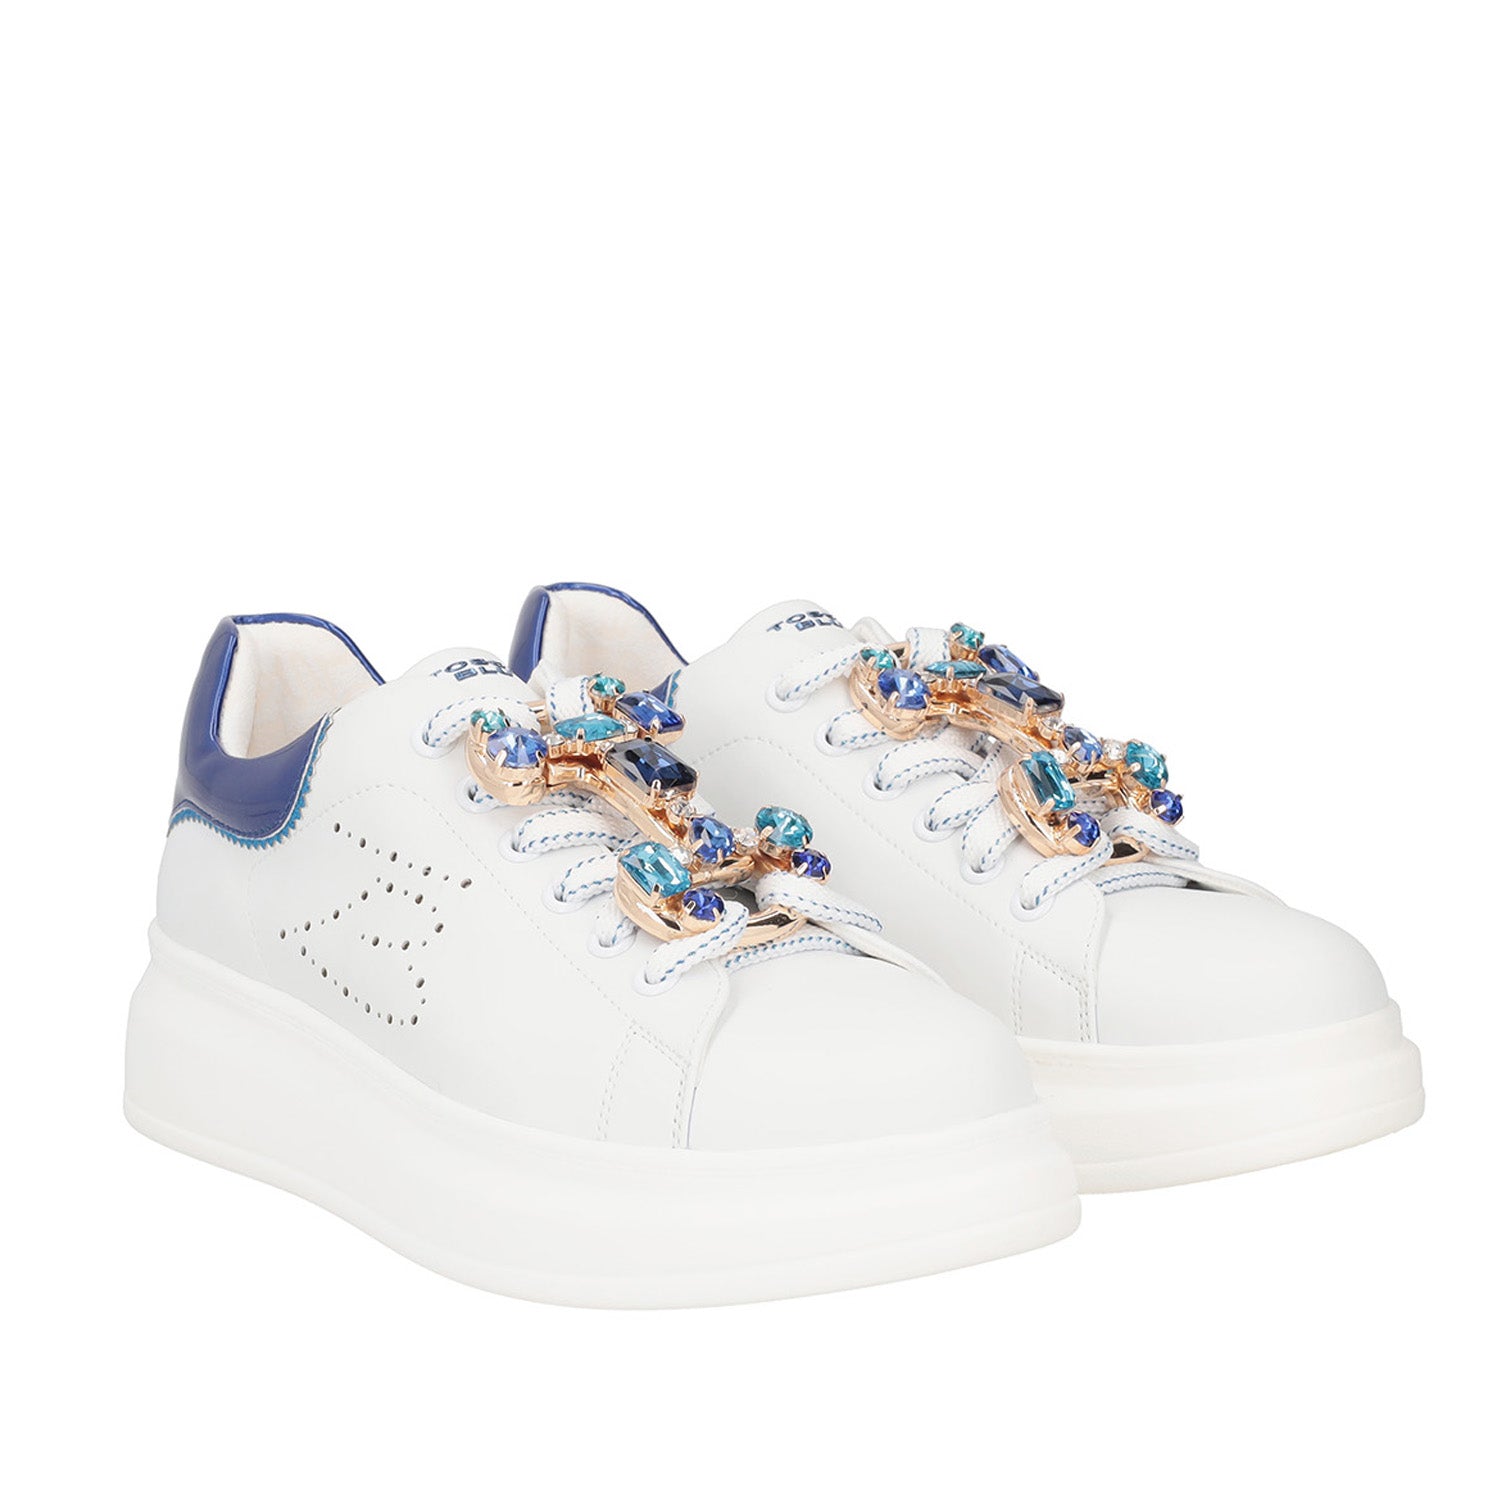 WHITE/BLUETTE GLAMOUR SNEAKER WITH JEWEL ACCESSORY